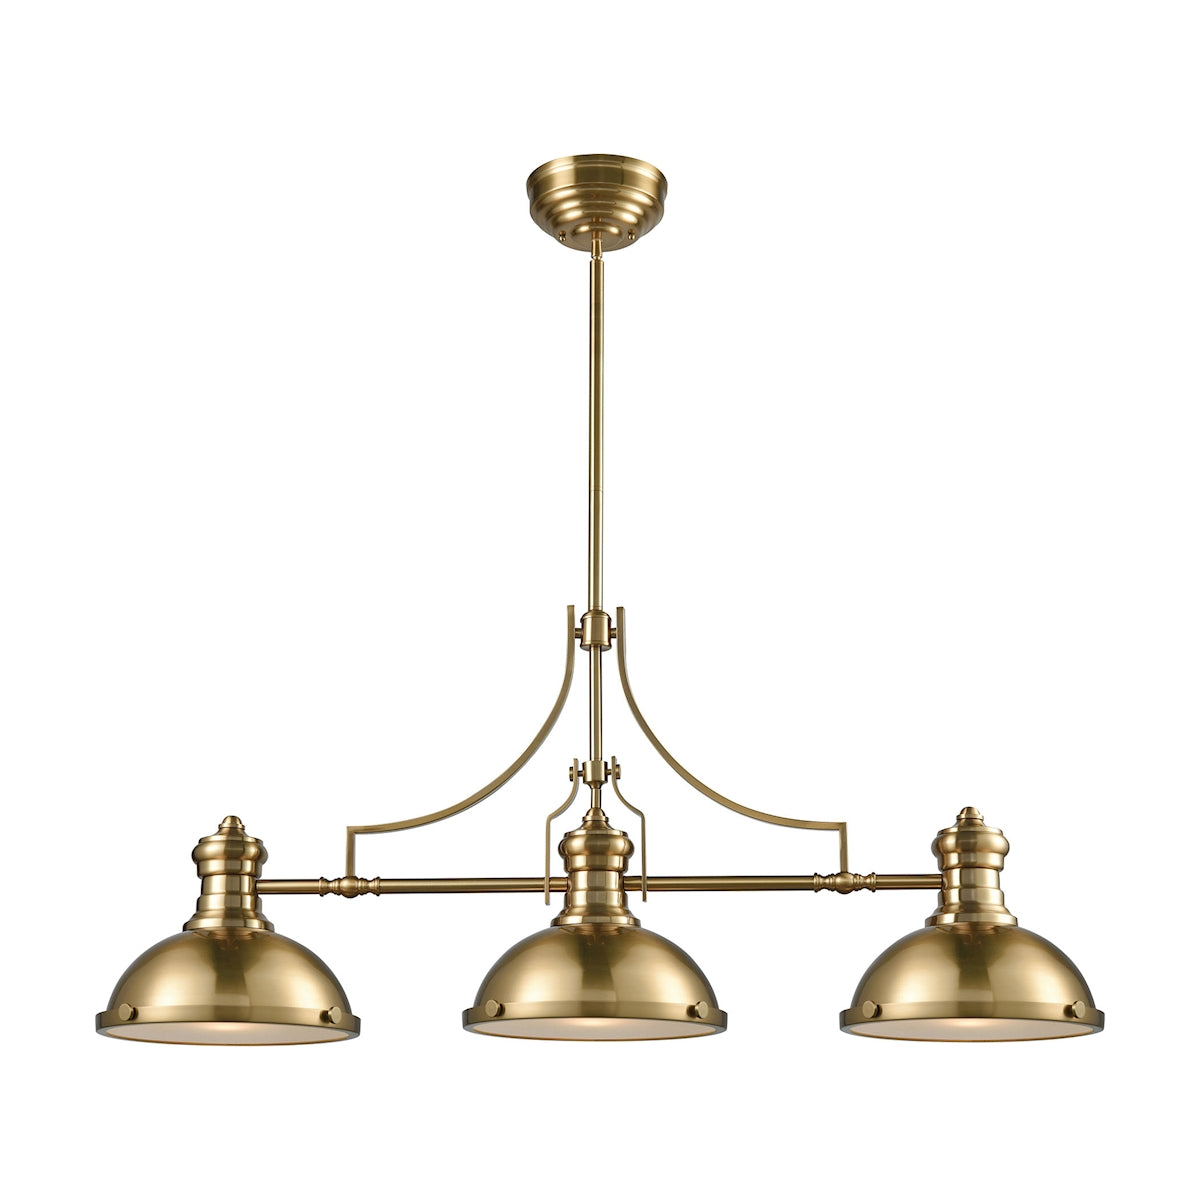 ELK Lighting 66595-3 Chadwick 3-Light Island Light in Satin Brass with Metal and Frosted Glass Diffuser